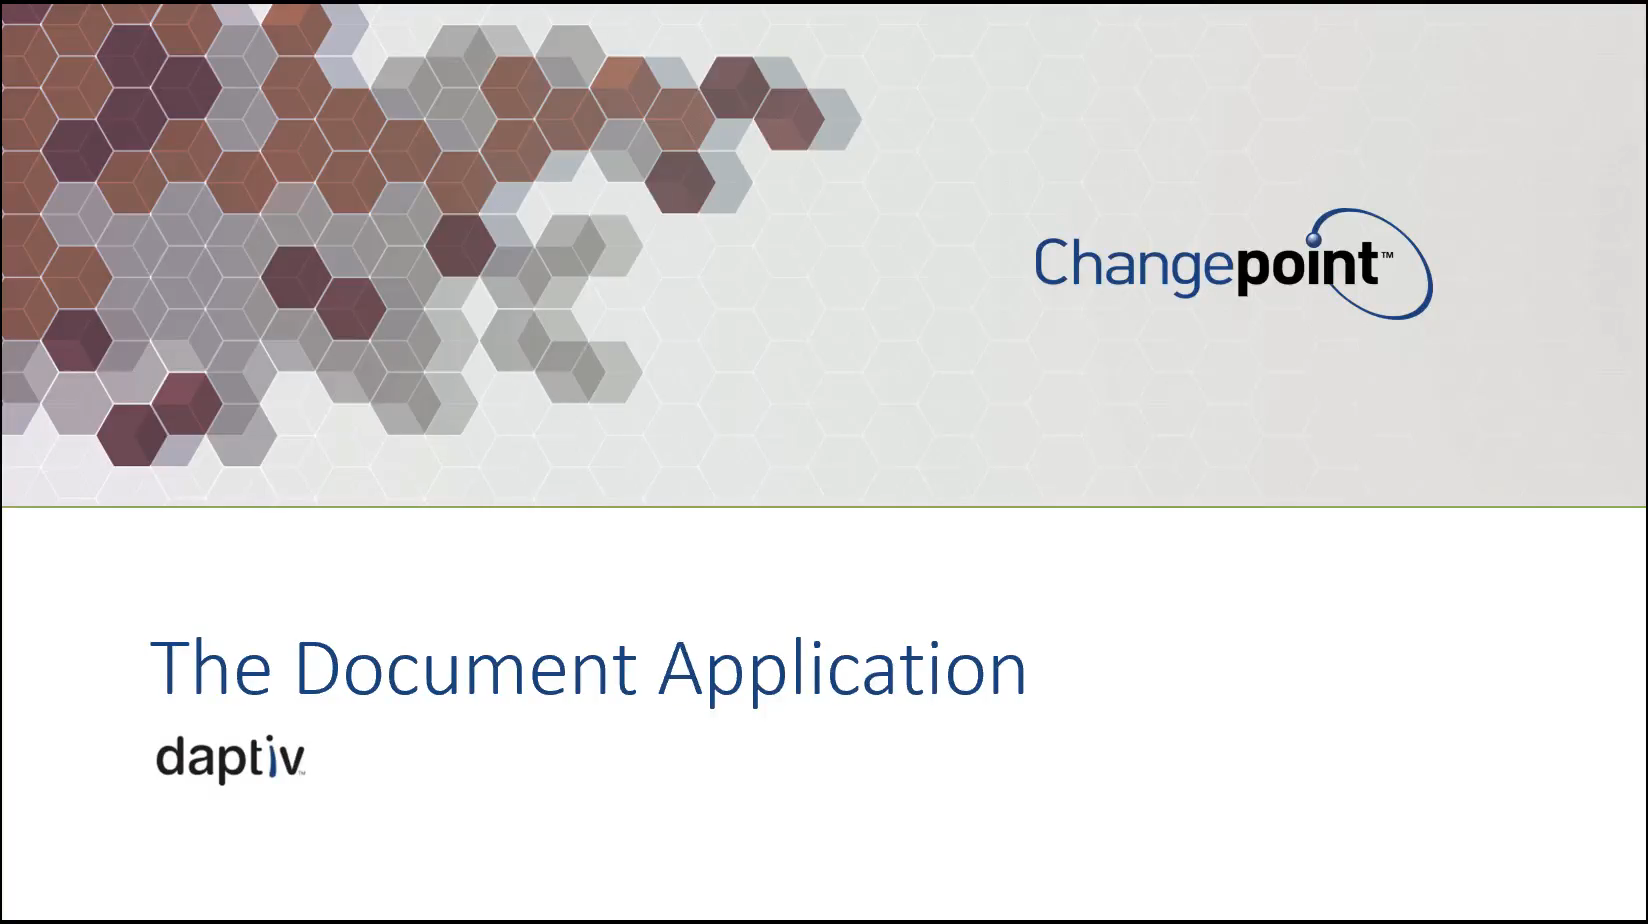 The Documents Application